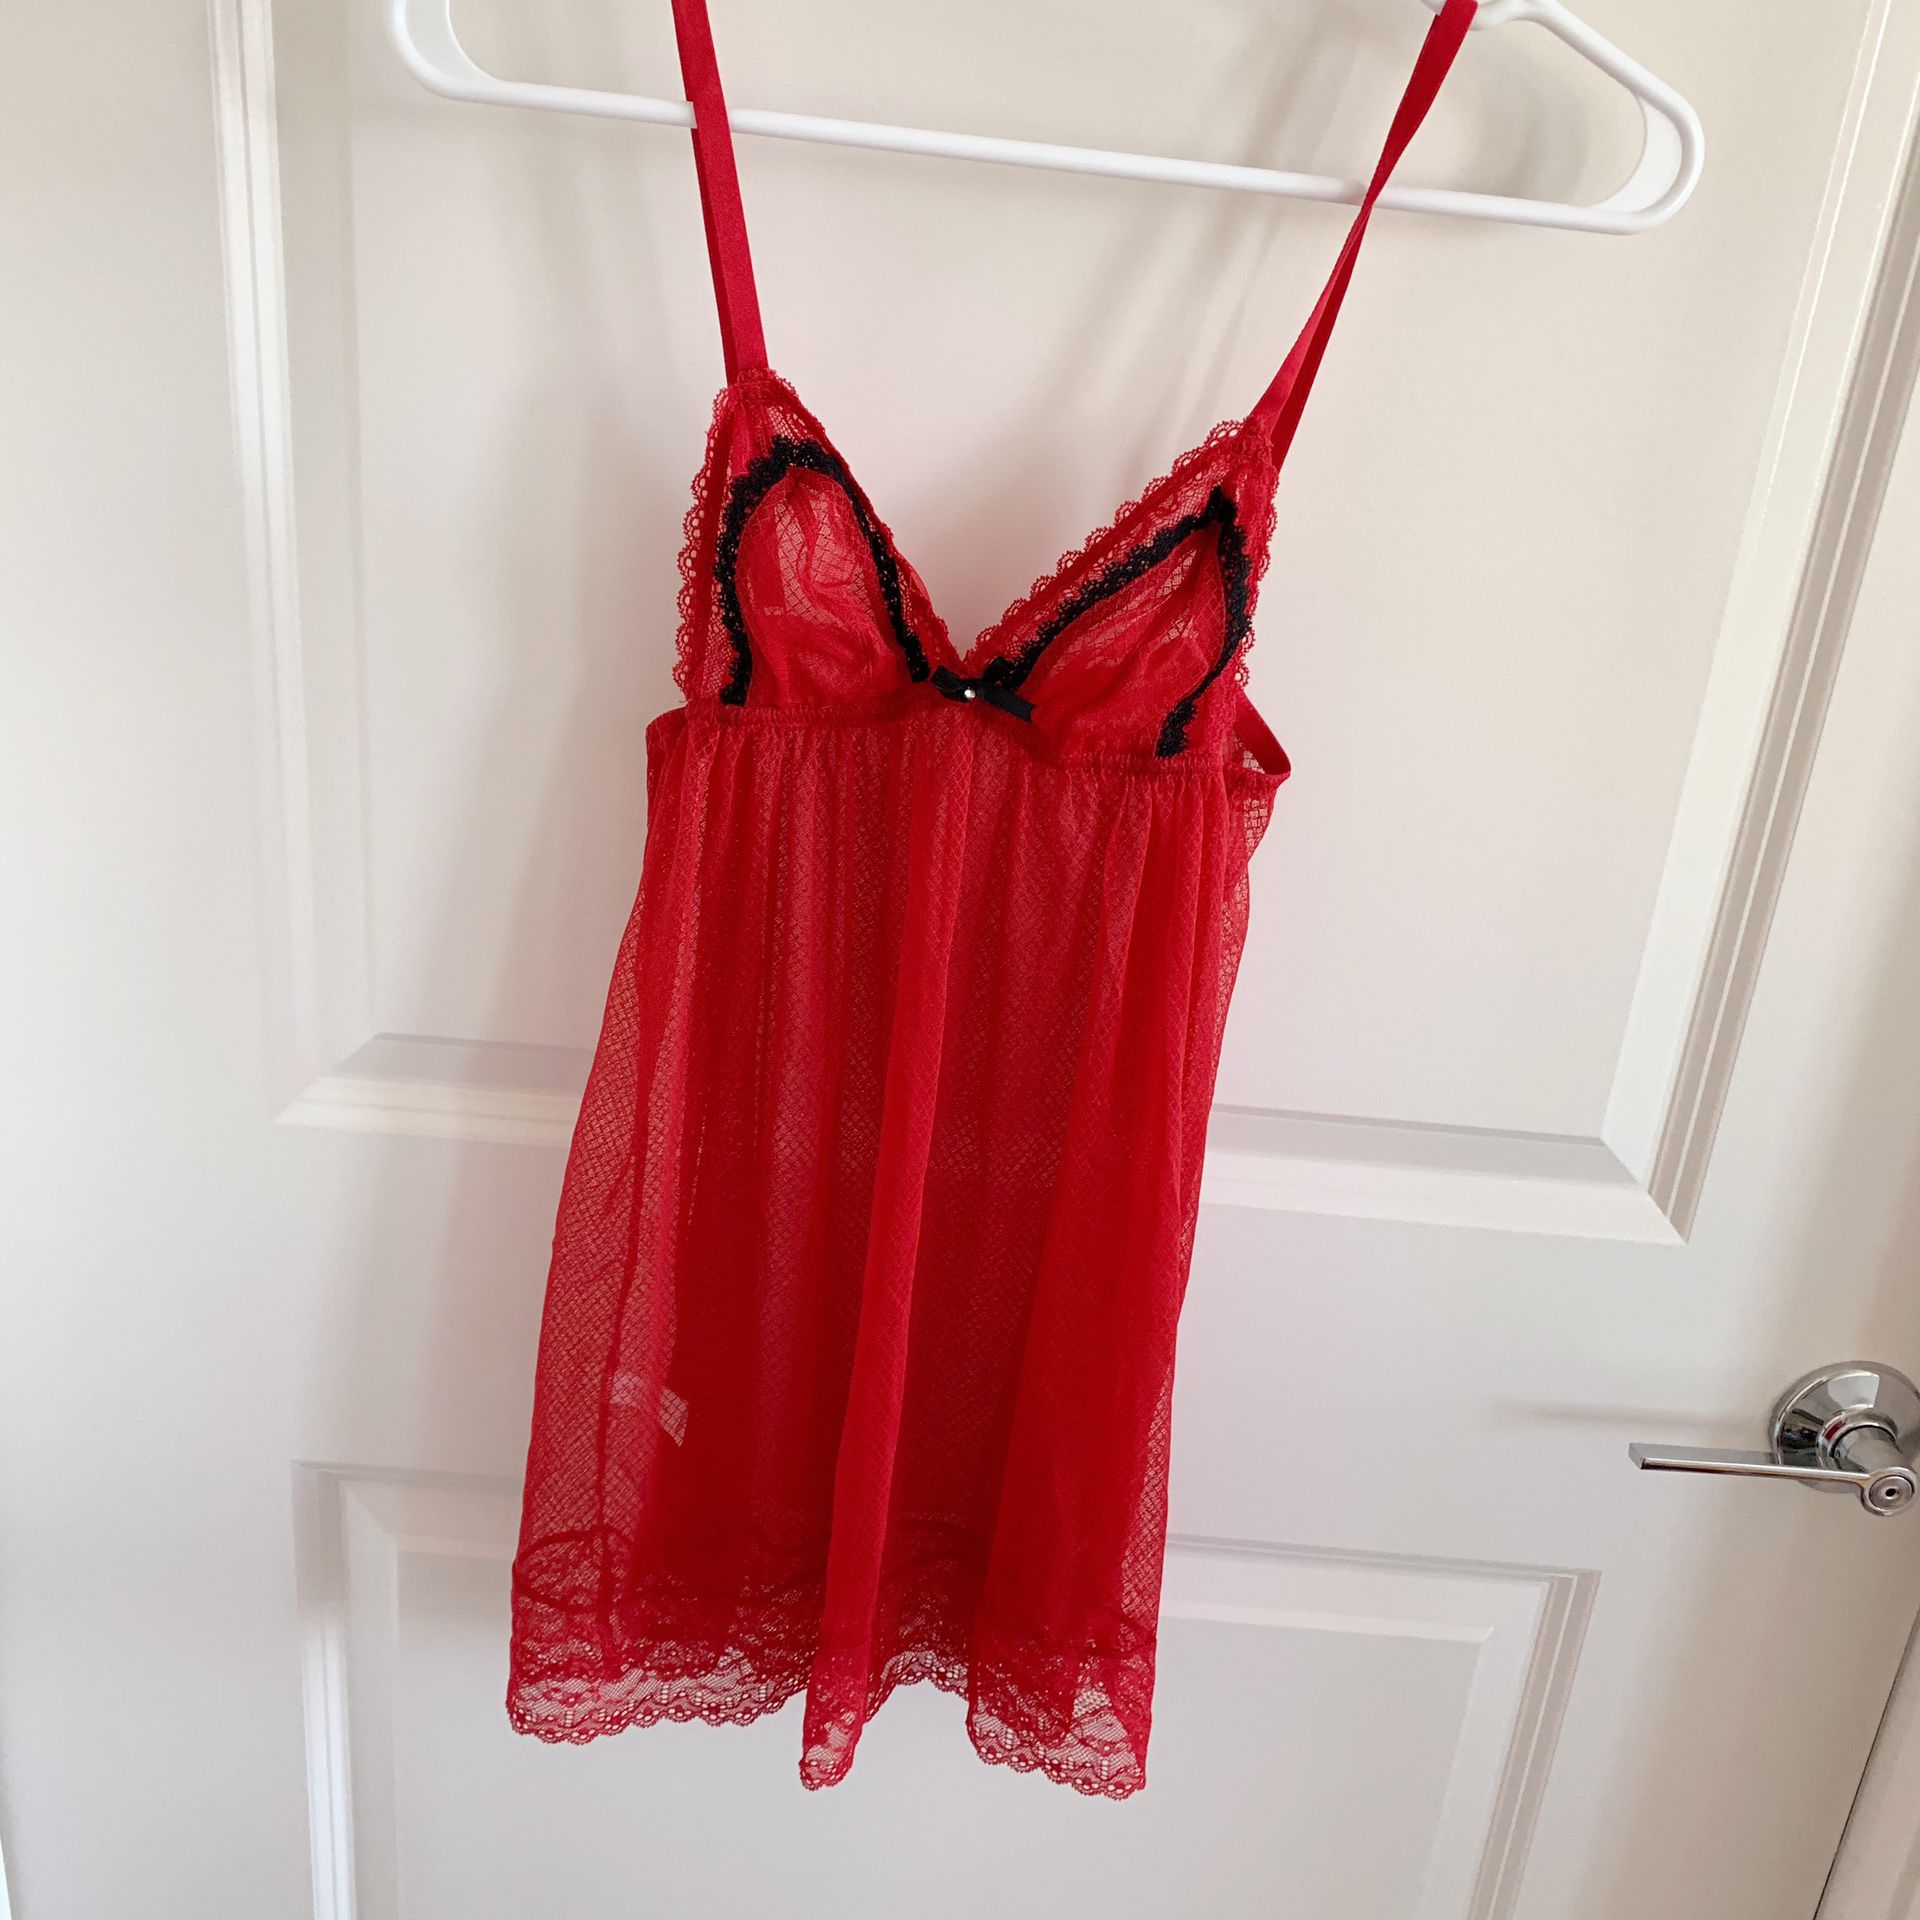 Brand new red lace nightgown, pajama